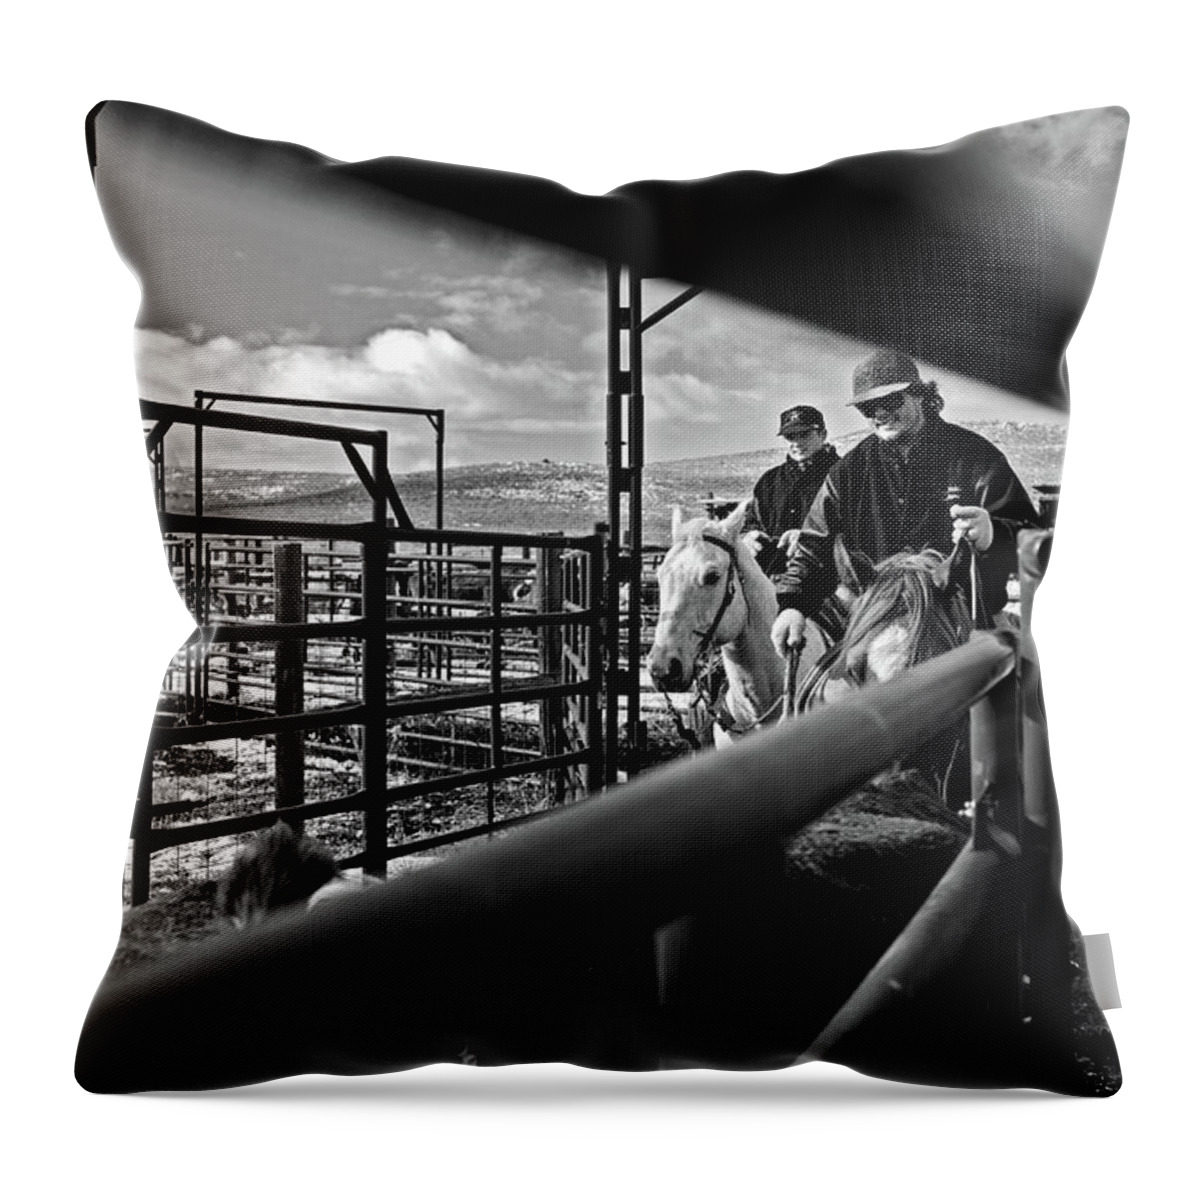 Ranch Throw Pillow featuring the photograph Cowboys at work by Julieta Belmont